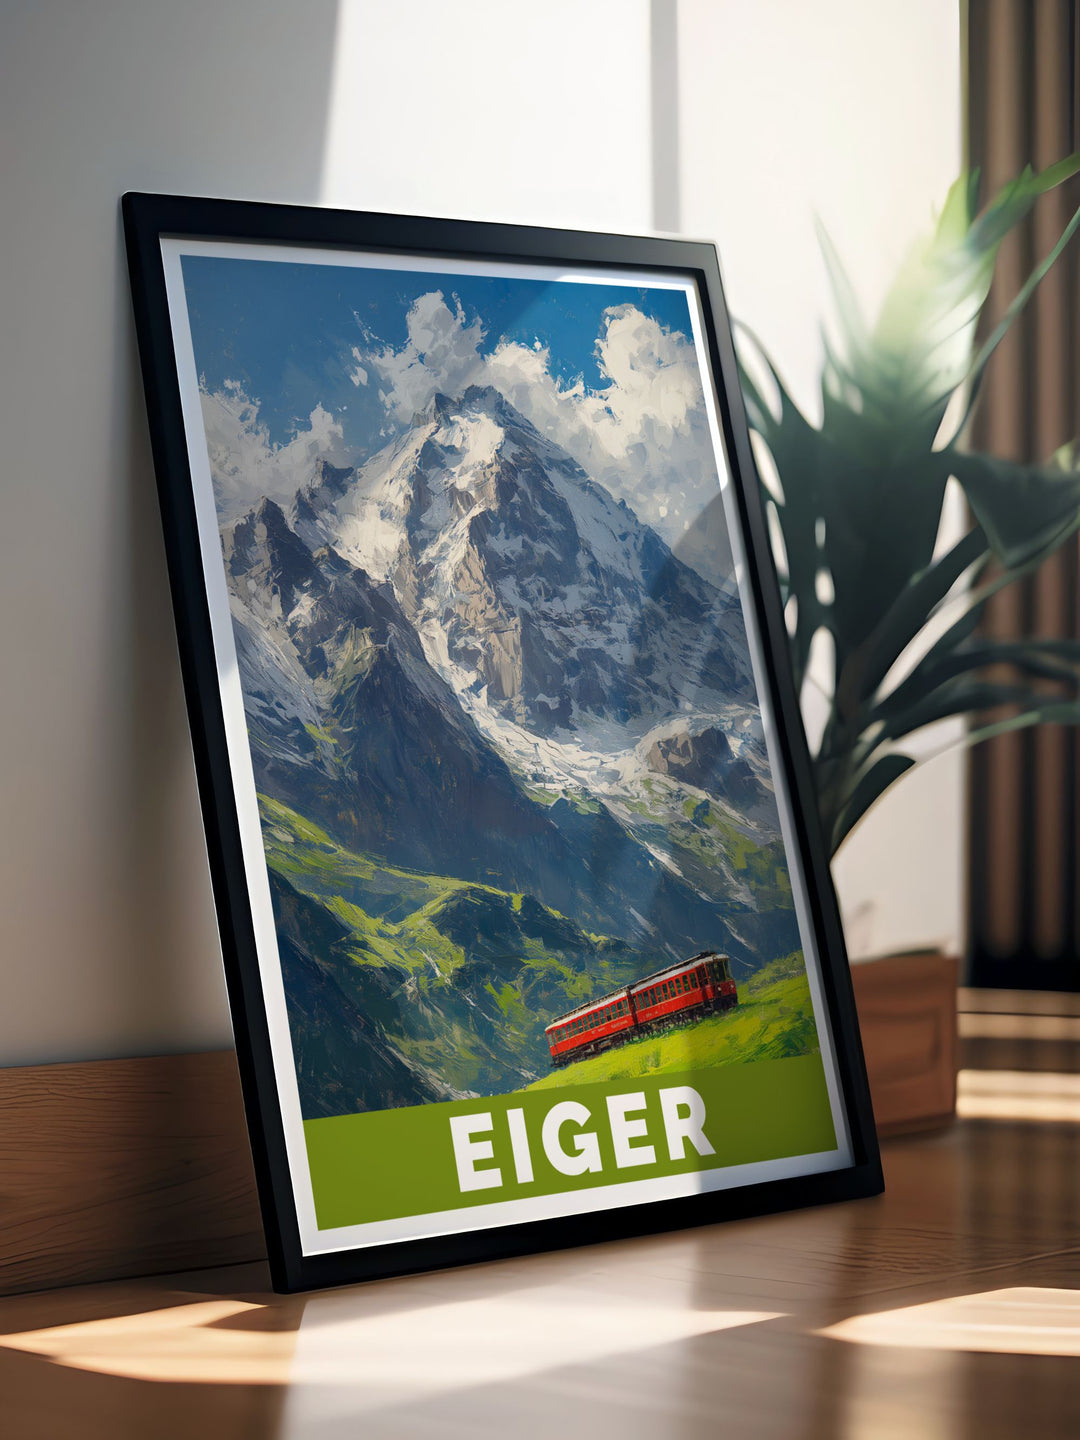 Eiger wall art capturing the essence of Switzerlands iconic mountain range featuring stunning views of the Eiger North Face and surrounding alpine scenery perfect for decorating your home with a touch of adventure and natural beauty.